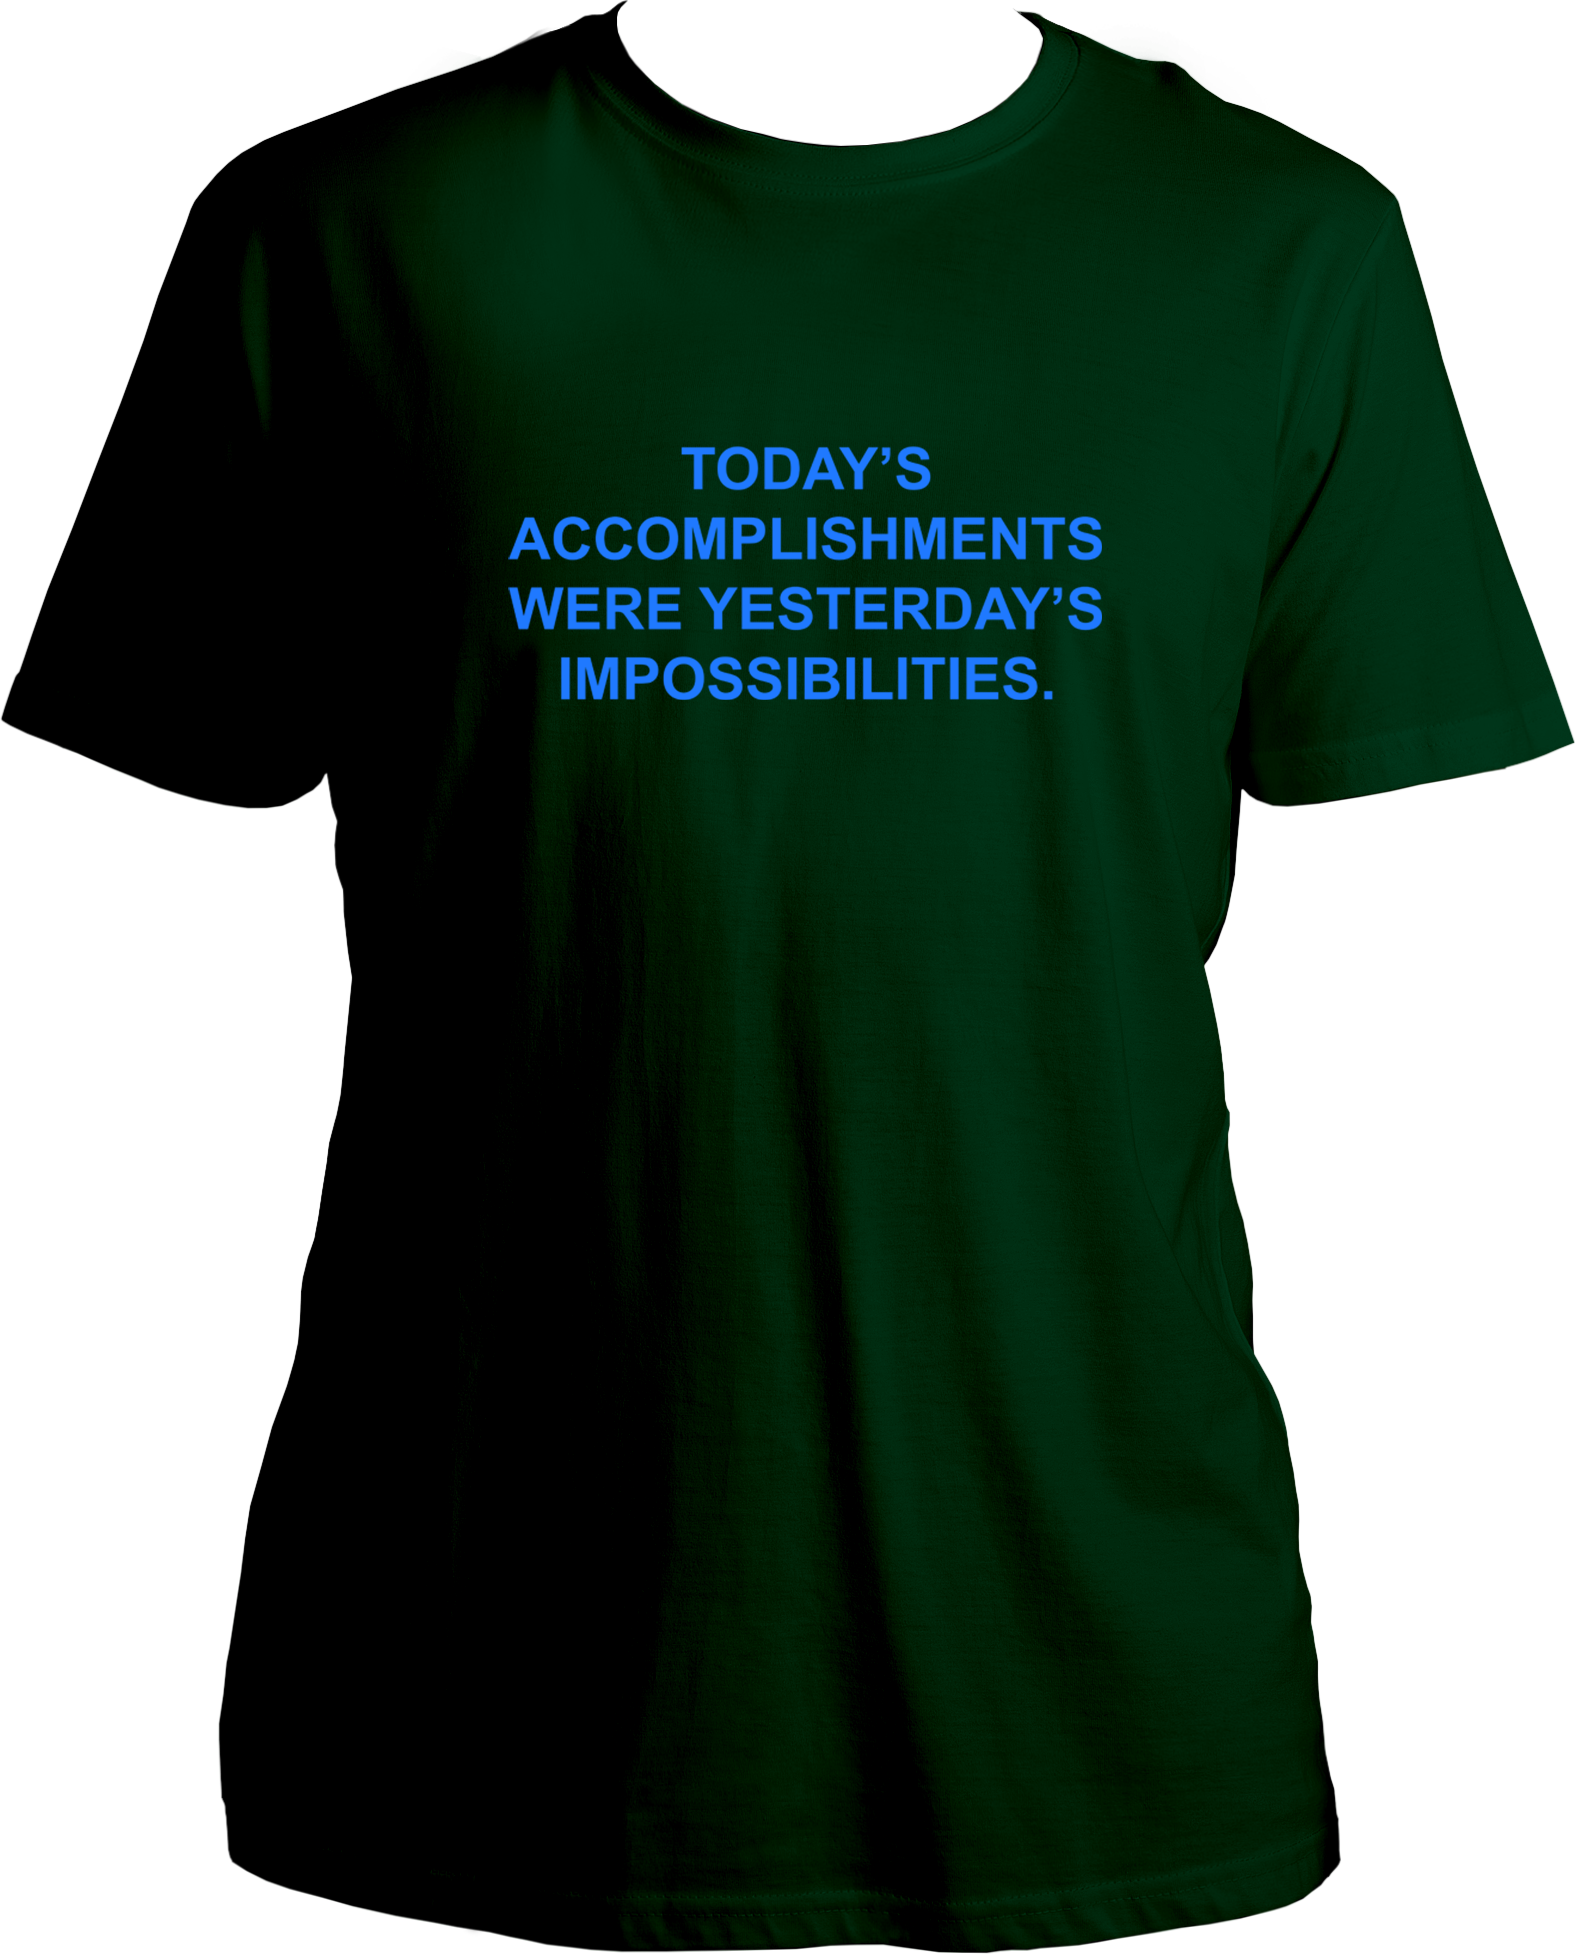 This unisex T-shirt from Garrari celebrates the power of possibility, with an English quote that serves as an inspirational reminder of how far you can go. Crafted from quality cotton fabric, the shirt has a comfortable fit that you can easily incorporate into your everyday wardrobe.